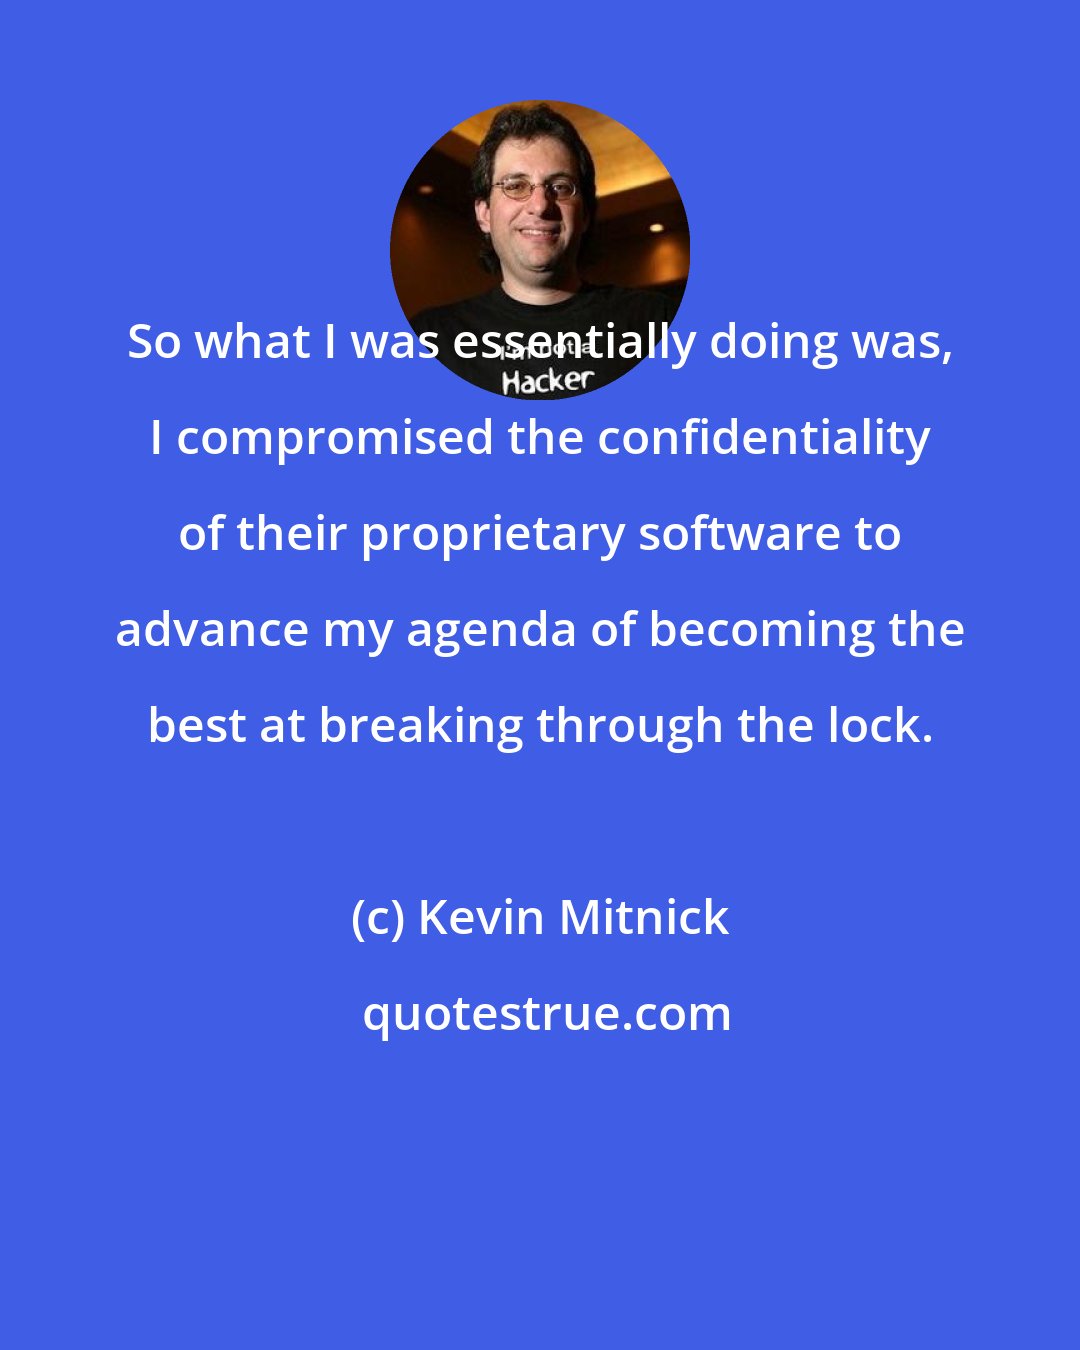 Kevin Mitnick: So what I was essentially doing was, I compromised the confidentiality of their proprietary software to advance my agenda of becoming the best at breaking through the lock.